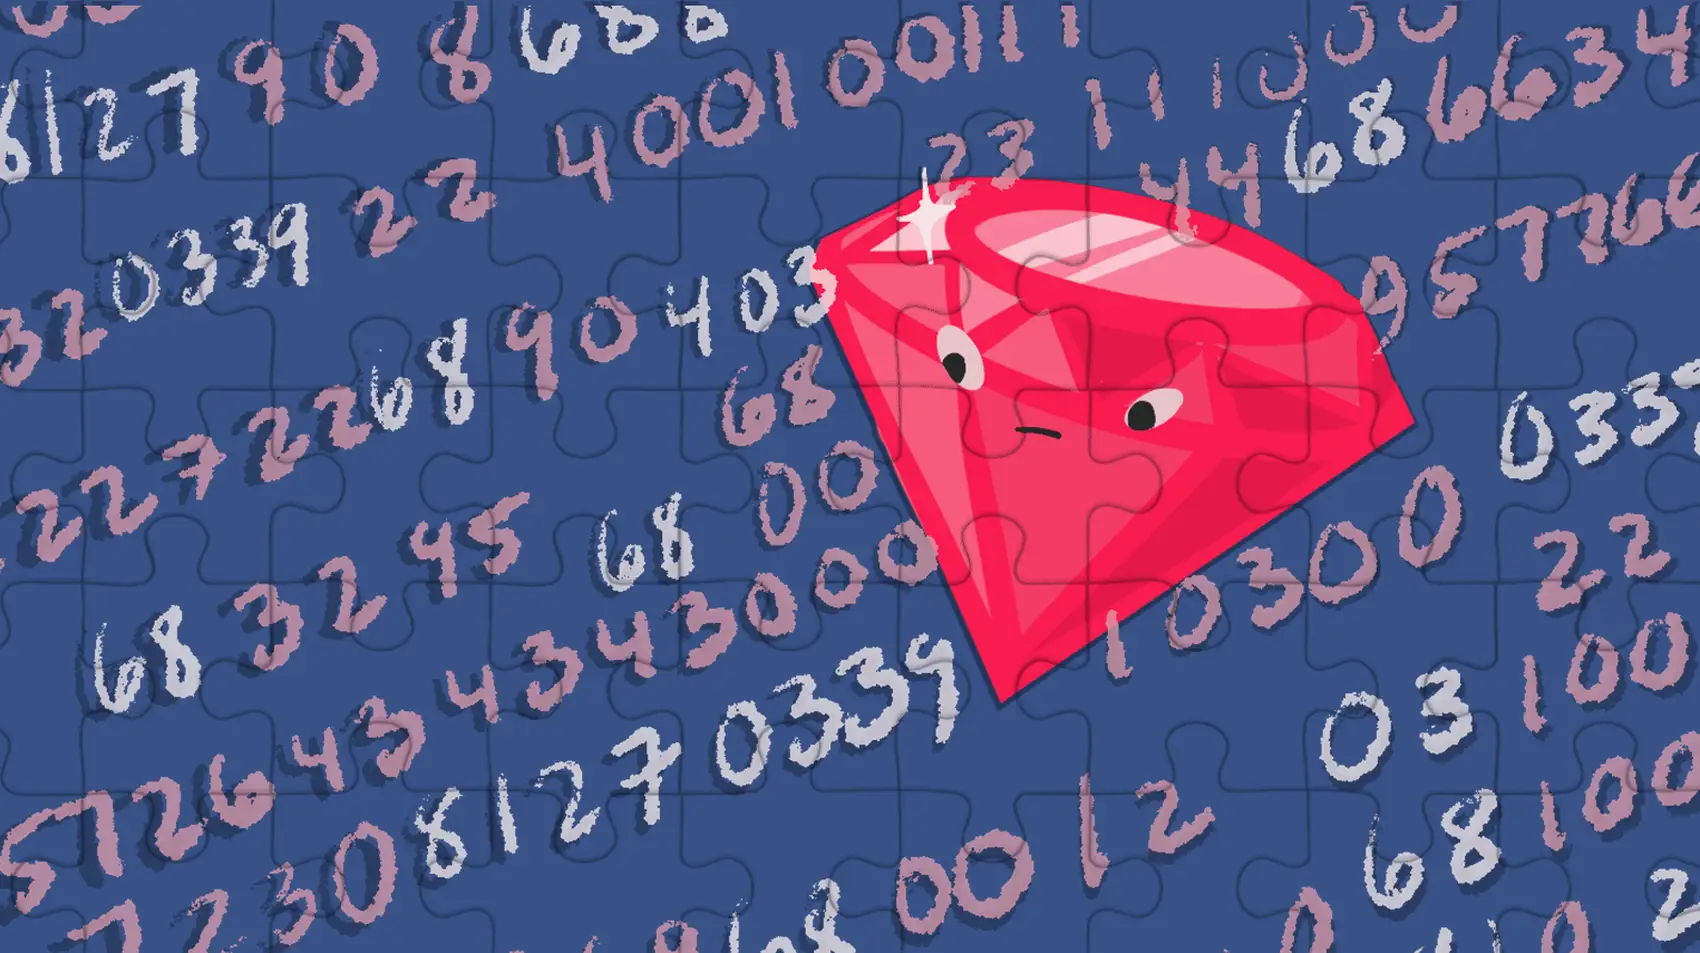 A jigsaw puzzle of a Ruby gem floating through a field of numbers and patterns.